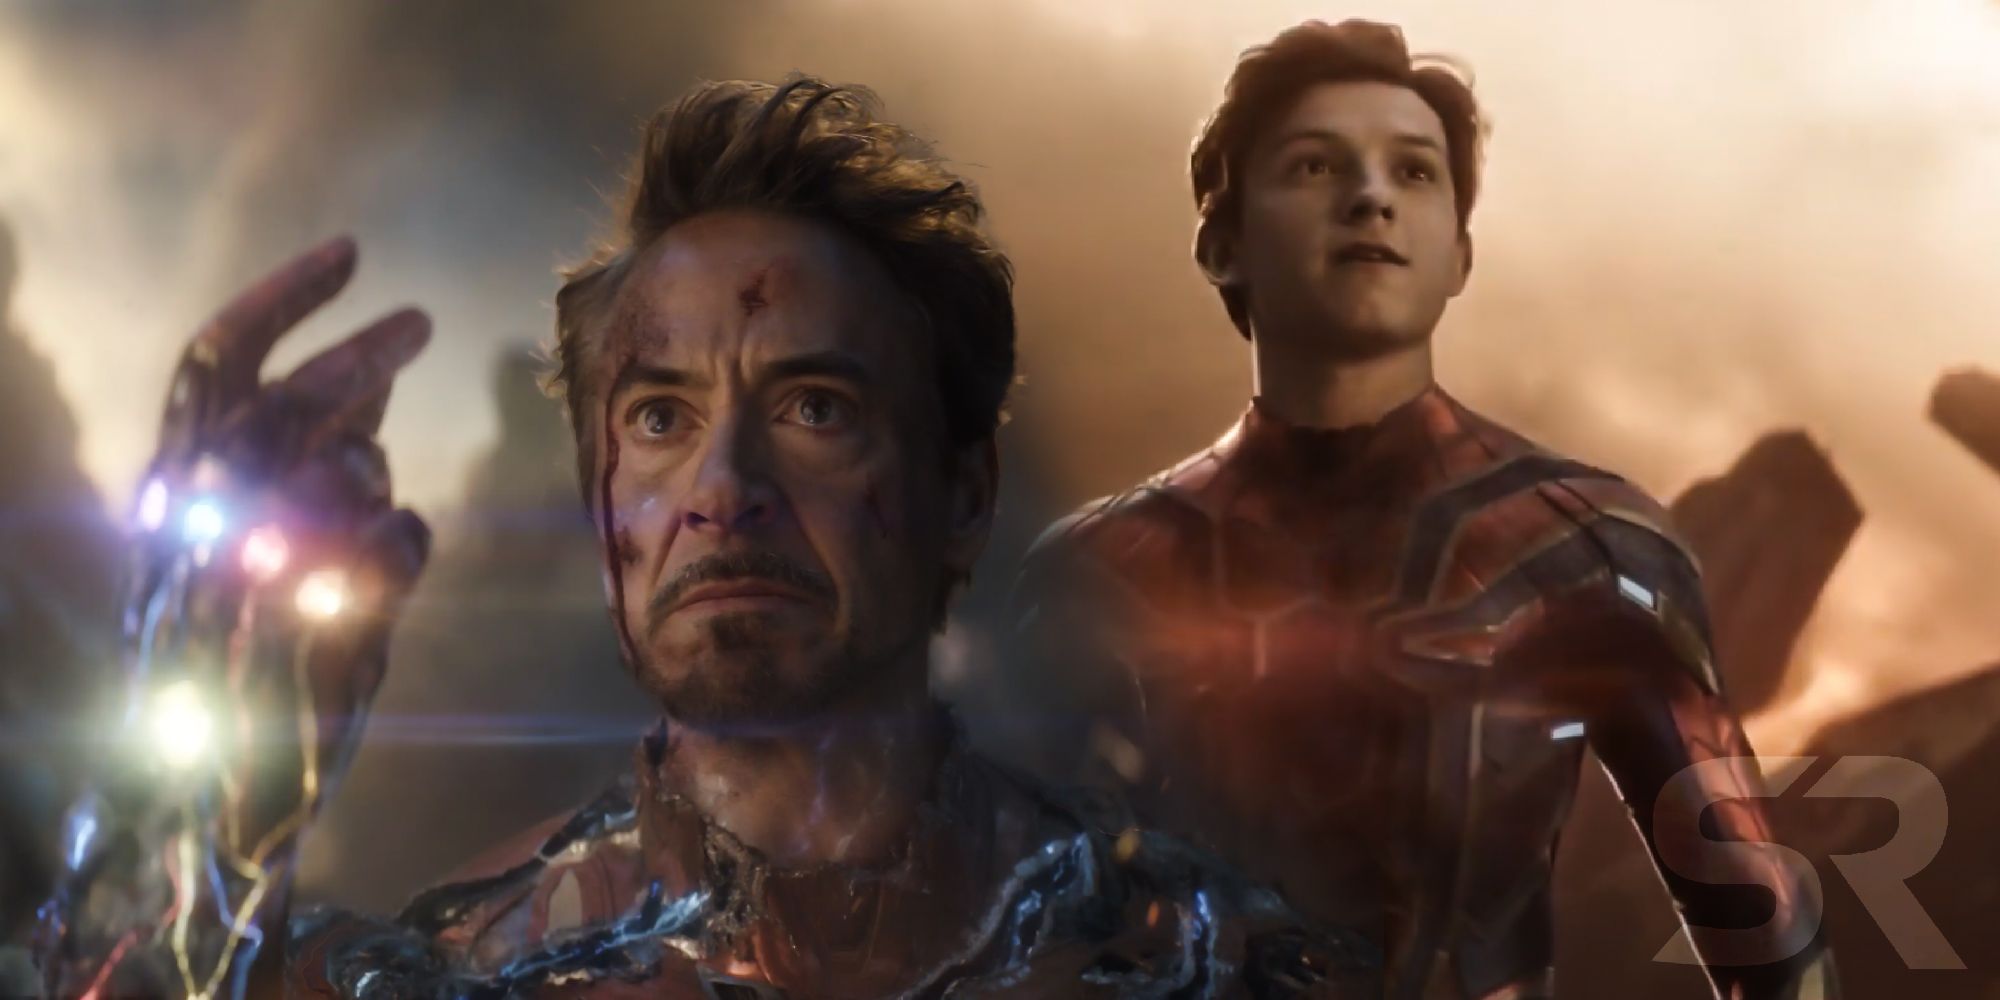 RDJ has serious words for Tom Holland’s career and spiderman